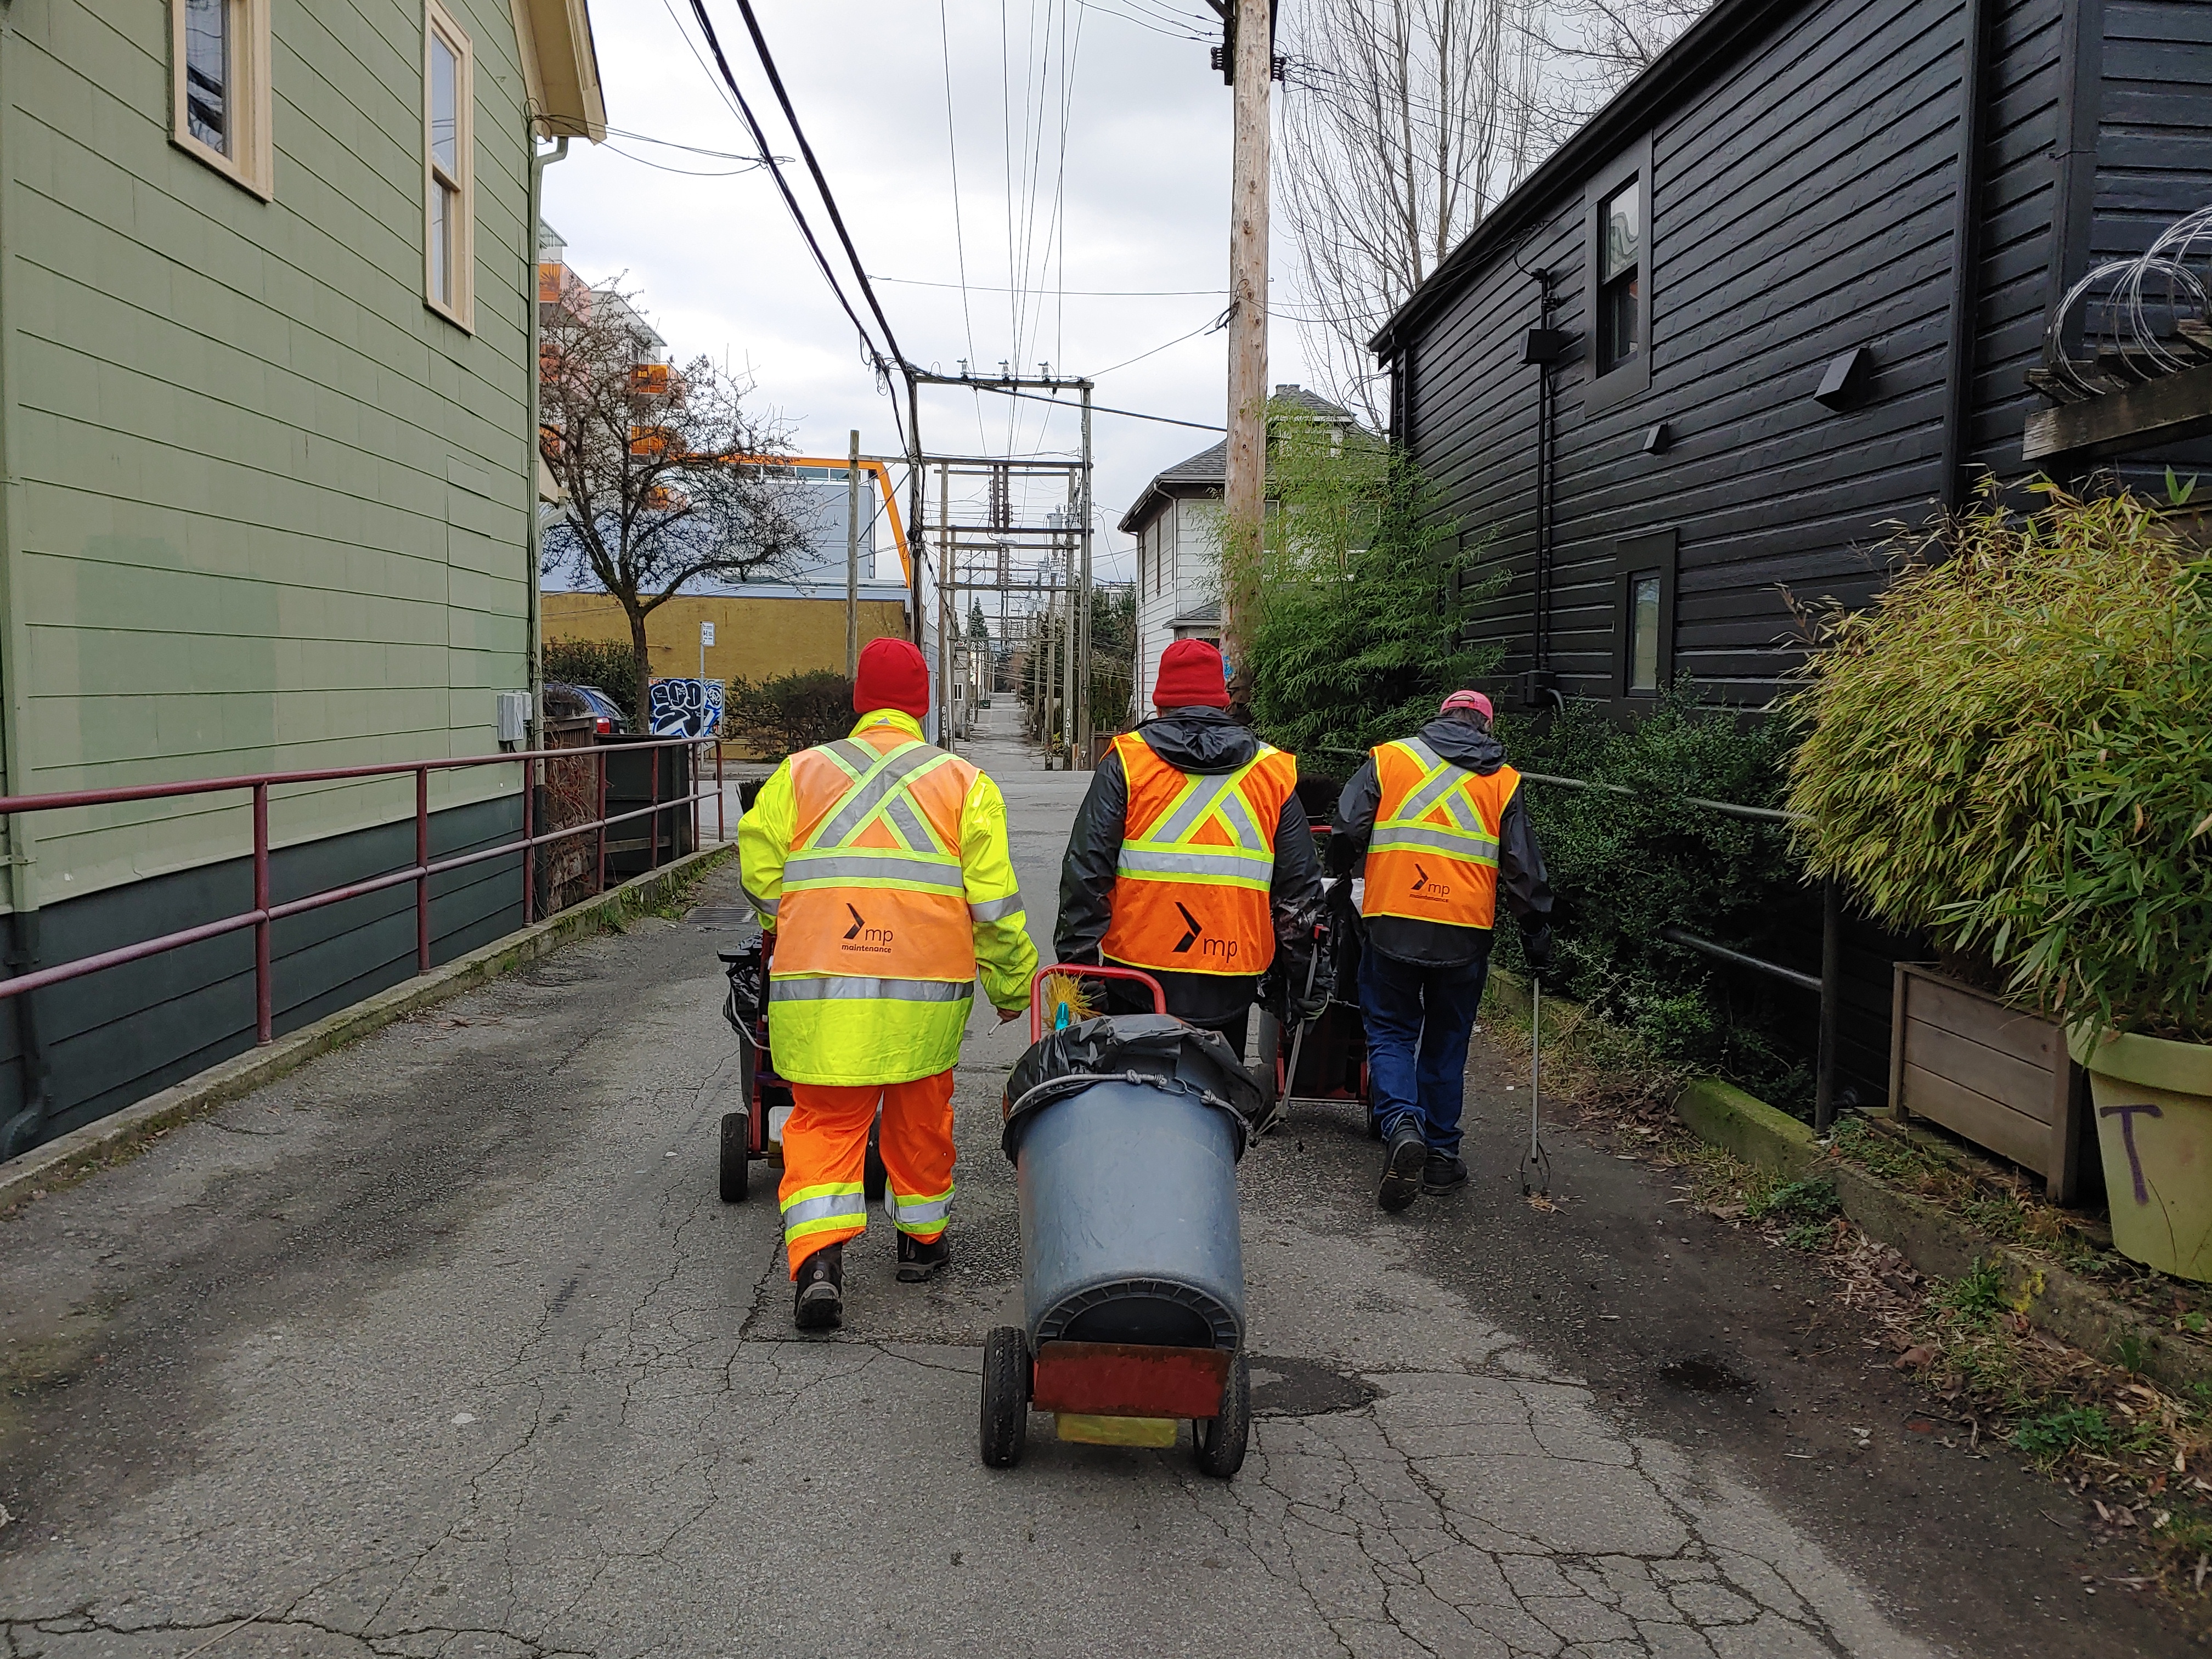 City of Vancouver approves $2.5 million street cleaning grant